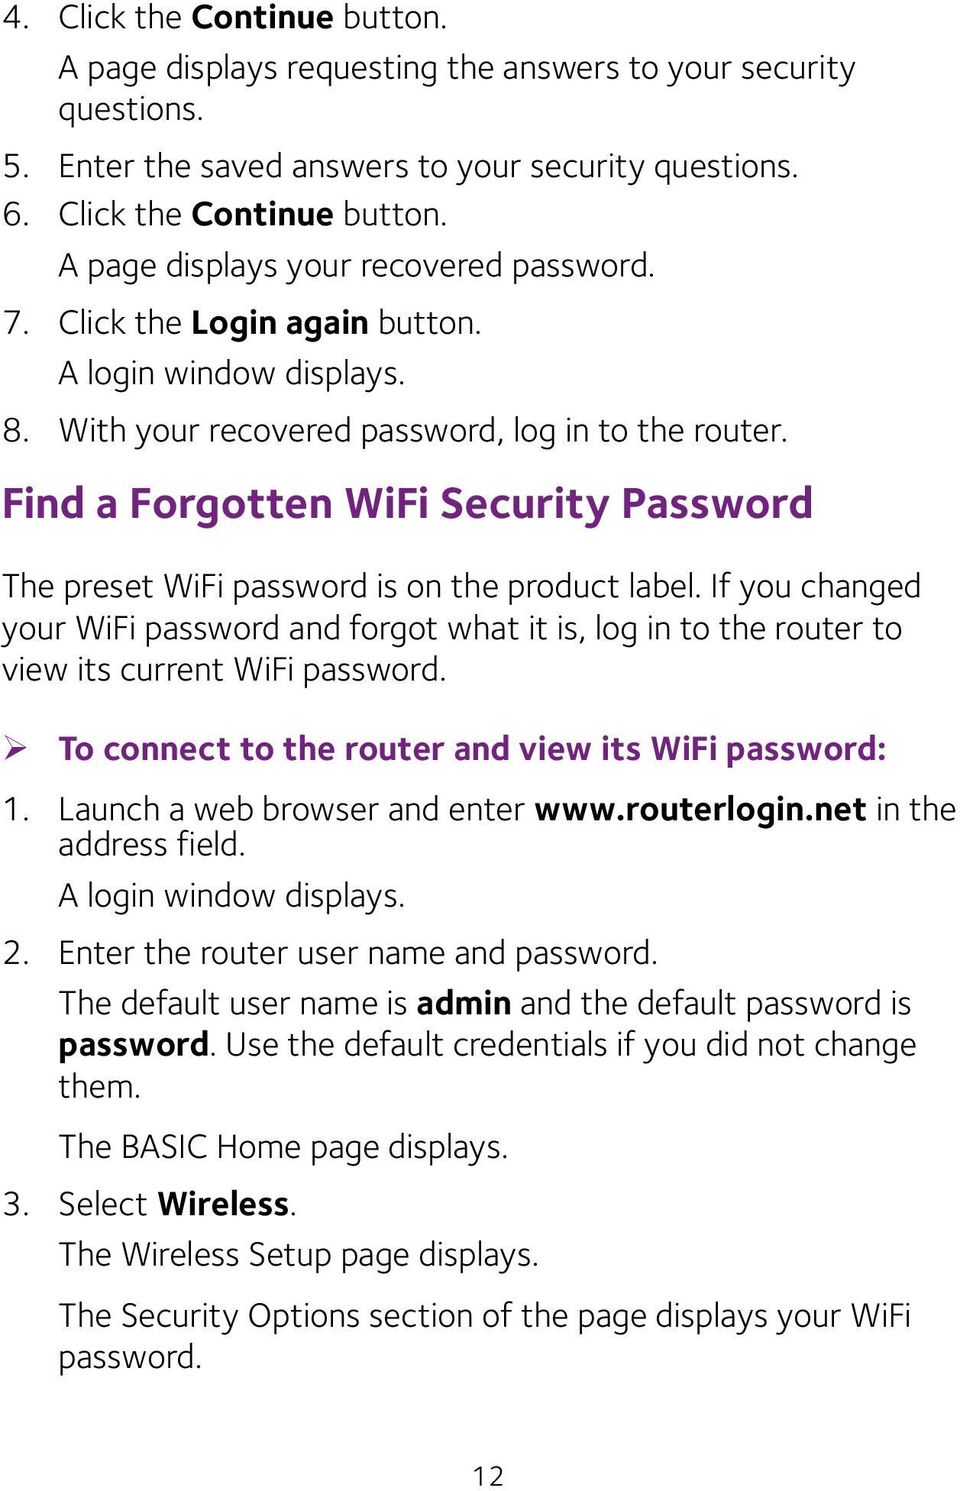 Find a Forgotten WiFi Security Password The preset WiFi password is on the product label.